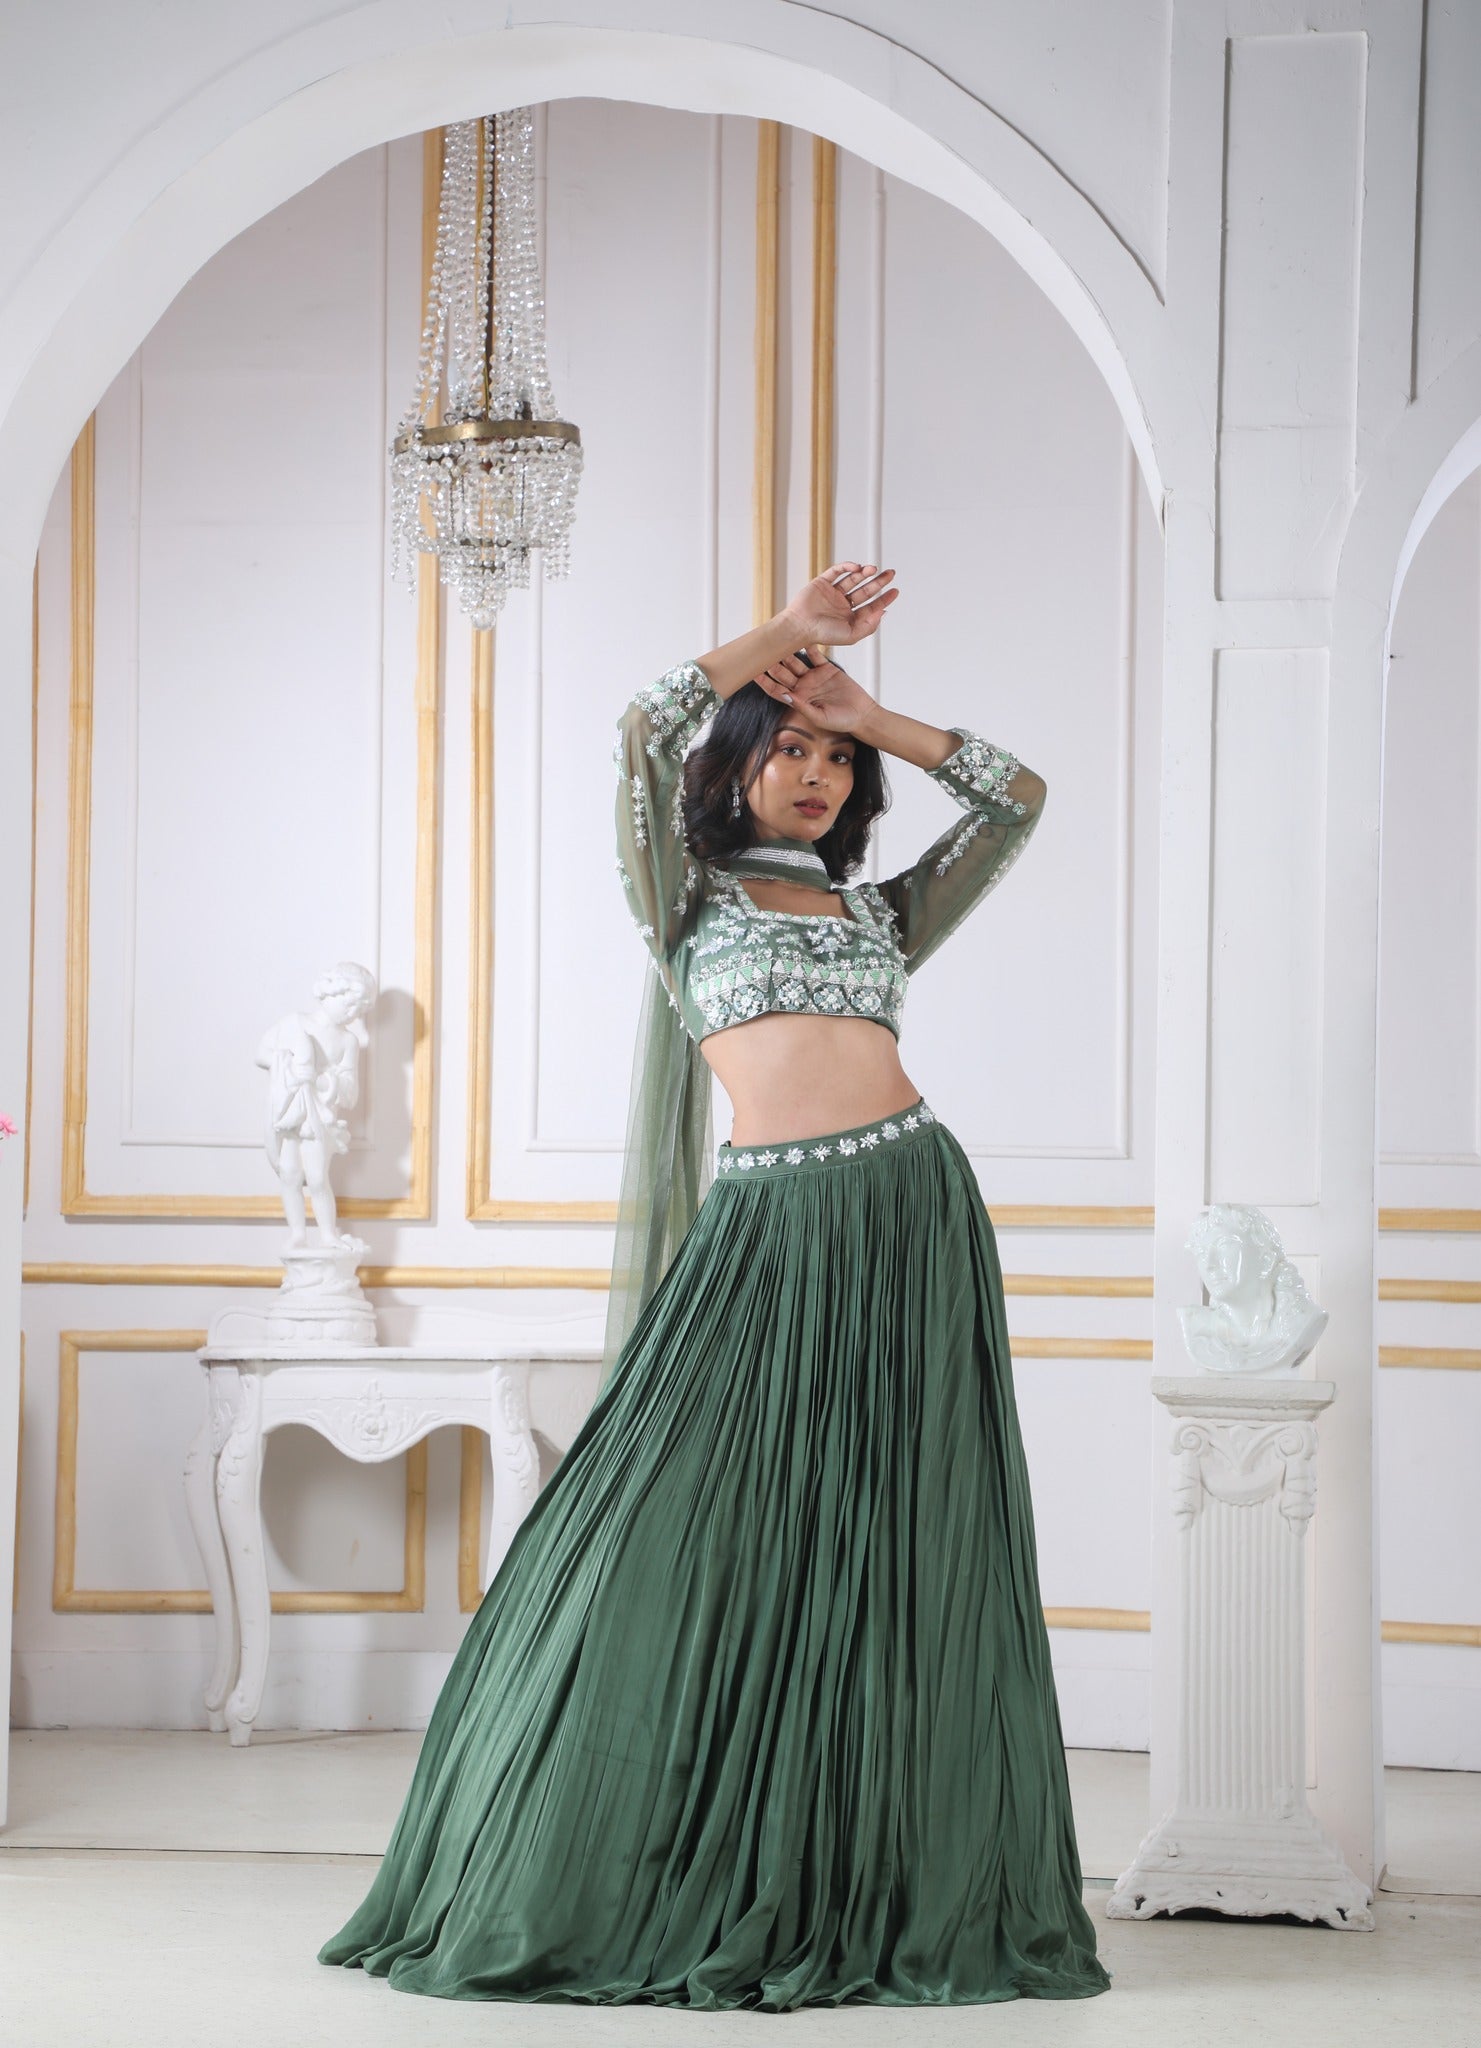 SEA GREEN LEHENGA SET WITH “ABLA” AND IVORY THREAD WORK PAIRED WITH A  MATCHING BLOUSE AND DUPATTA WITH FRILL DETAILS - Seasons India